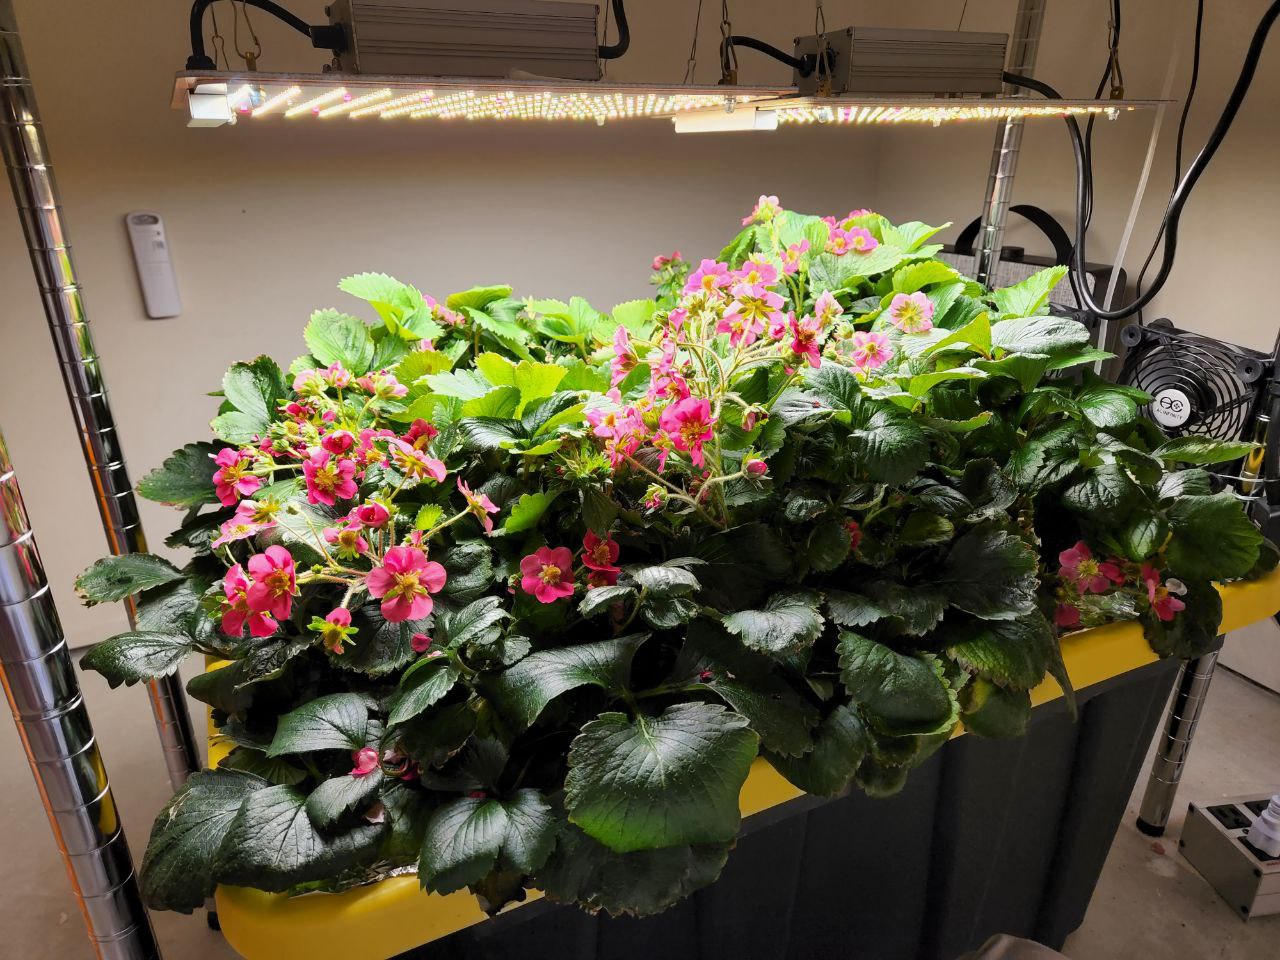 six strawberry plants with crazy dark green leaves creating a thick bush. there are pink flowers on top under two grow lights.